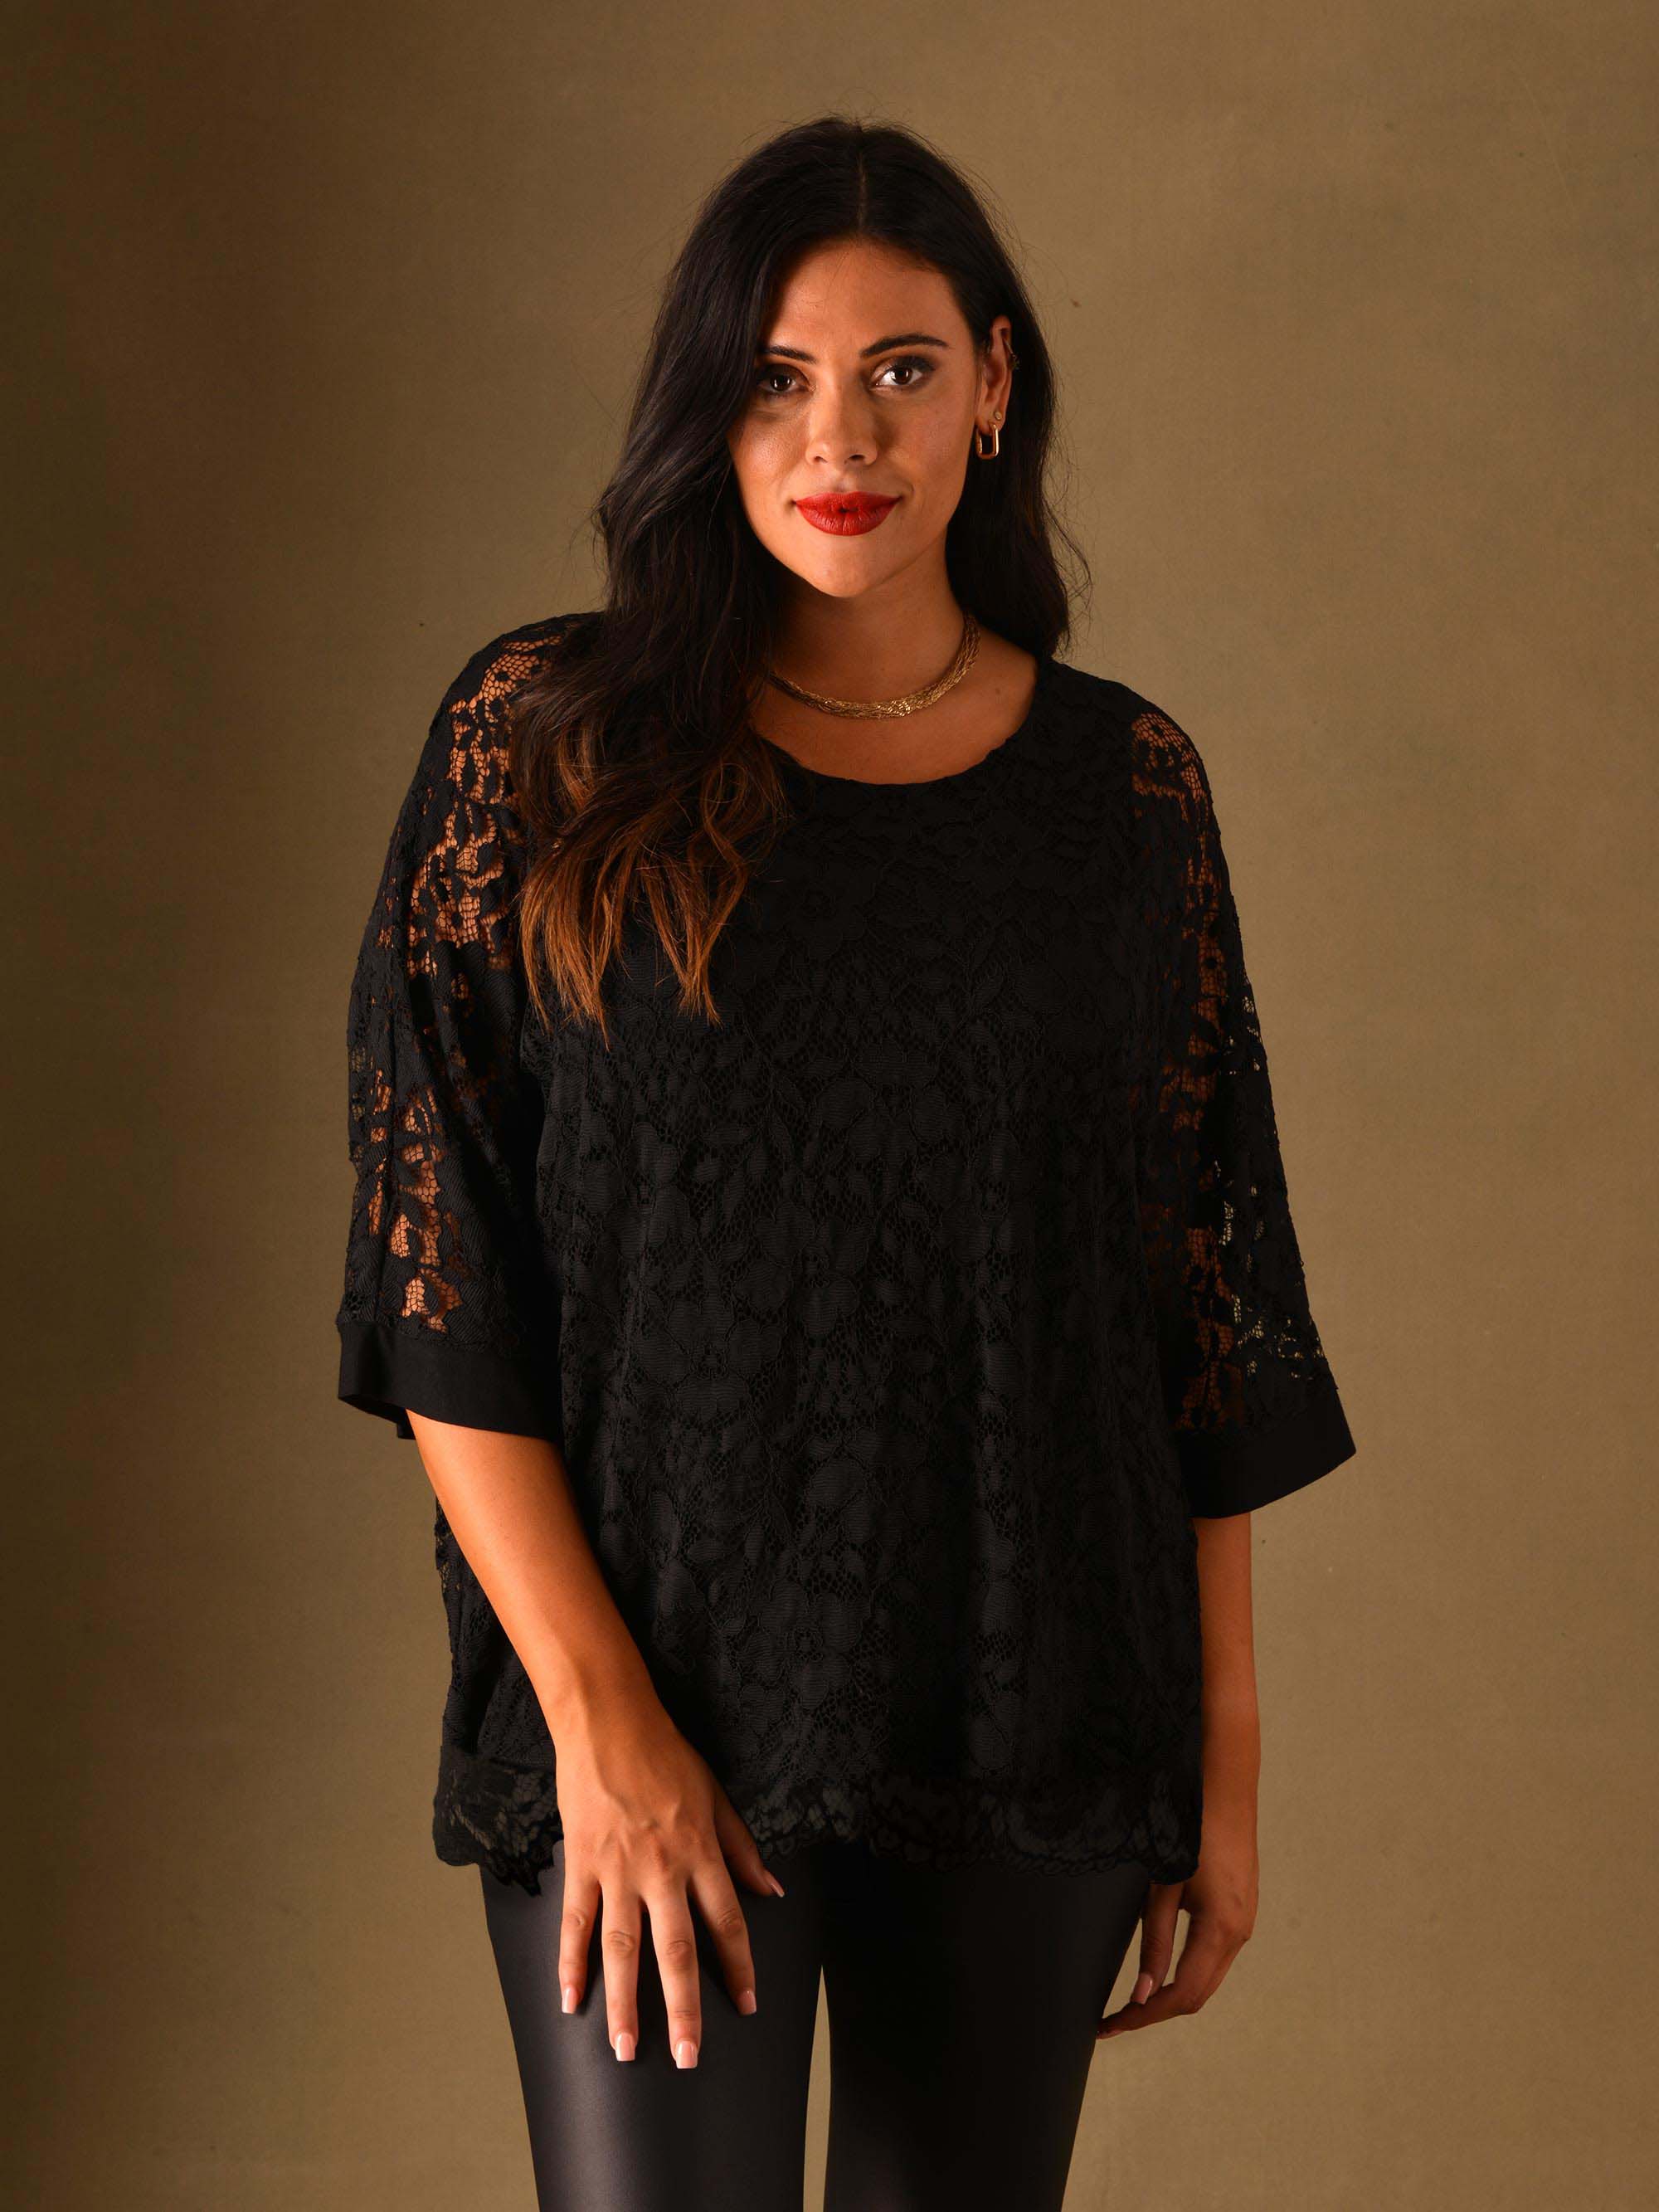 Black Lace Overlay Top